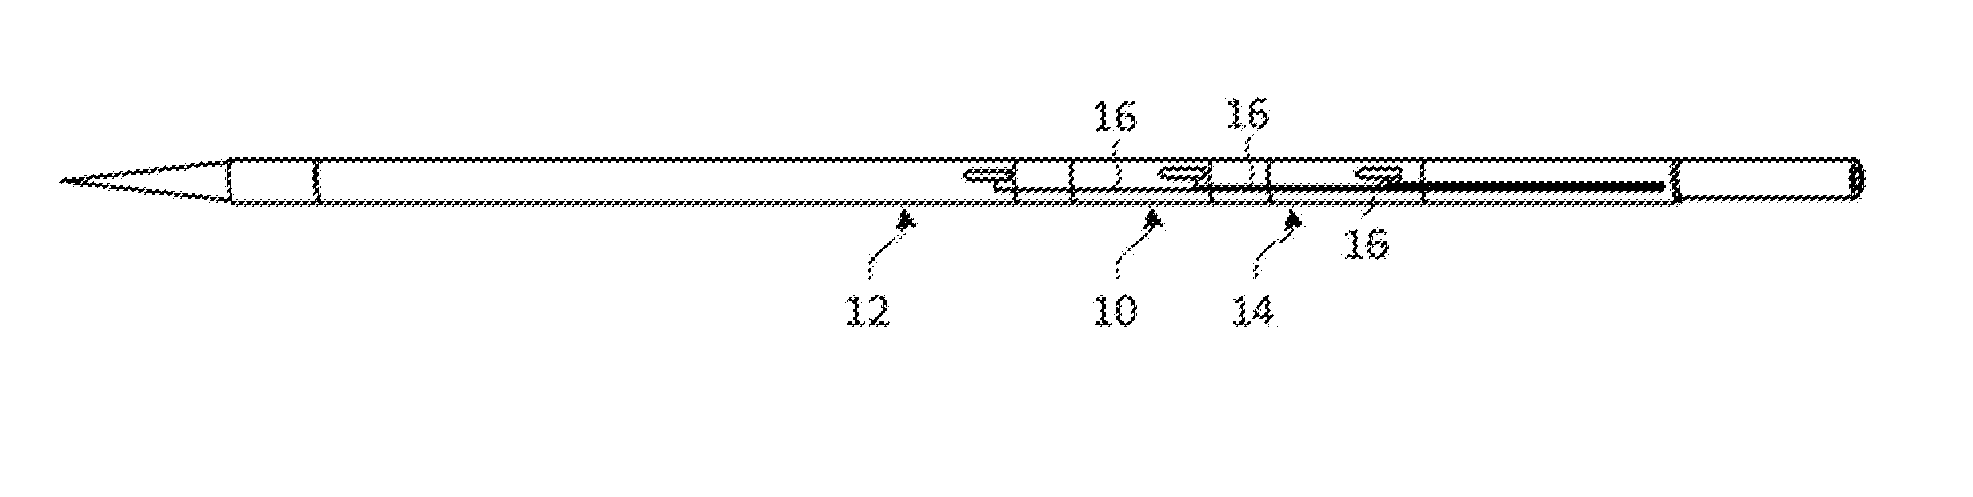 Dual-use Catheter for Continuous Analyte Measurement and Drug Delivery